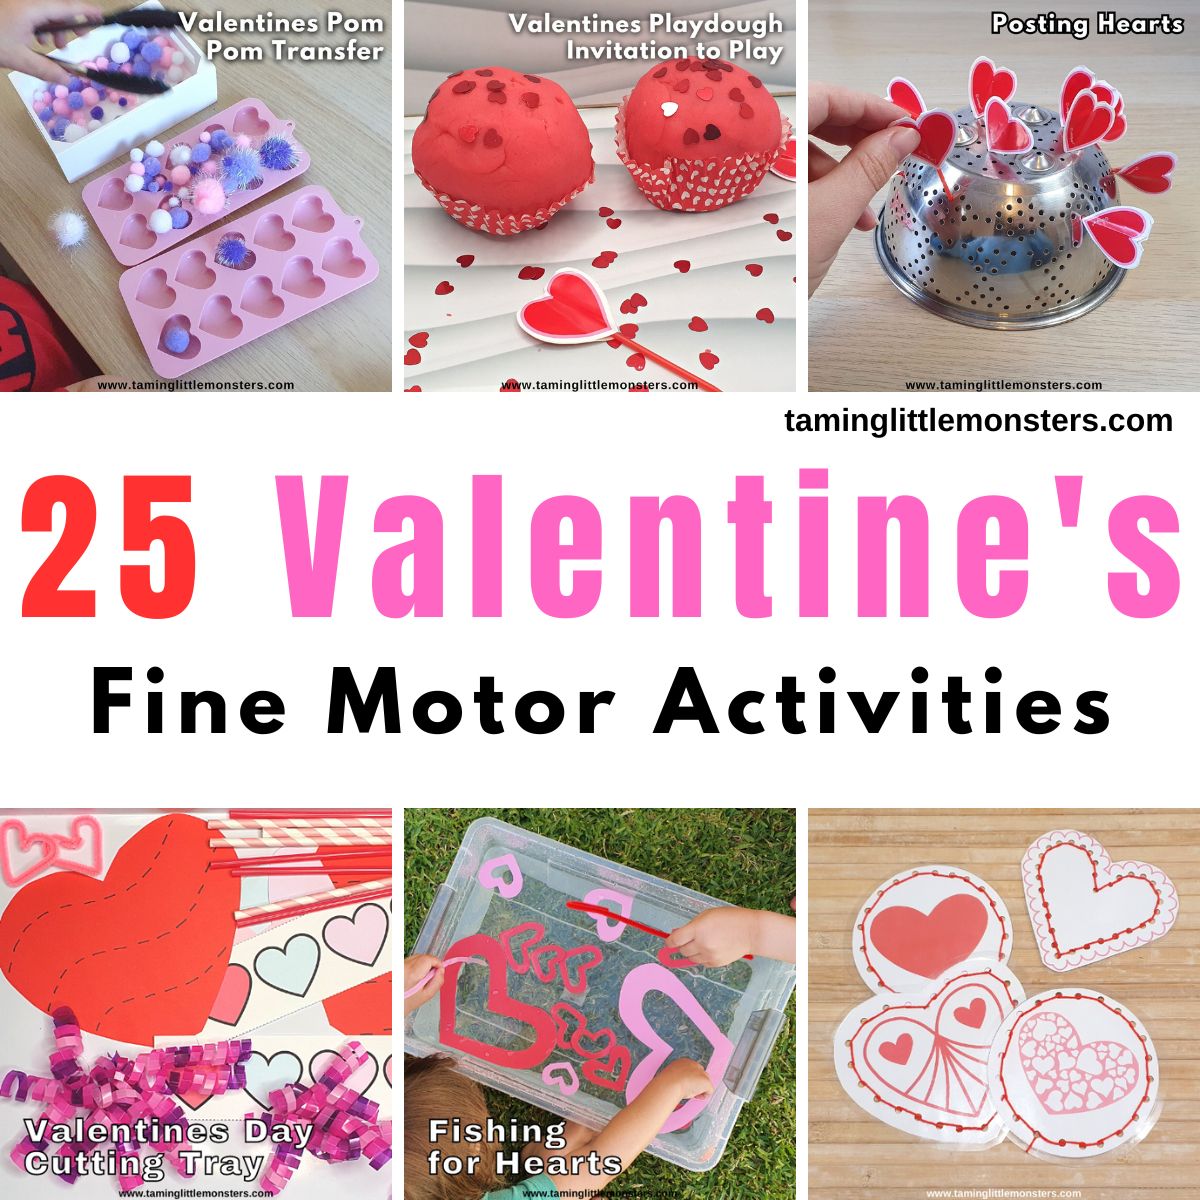 25 Easy Valentine's Day Fine Motor Activities for Kids - Taming